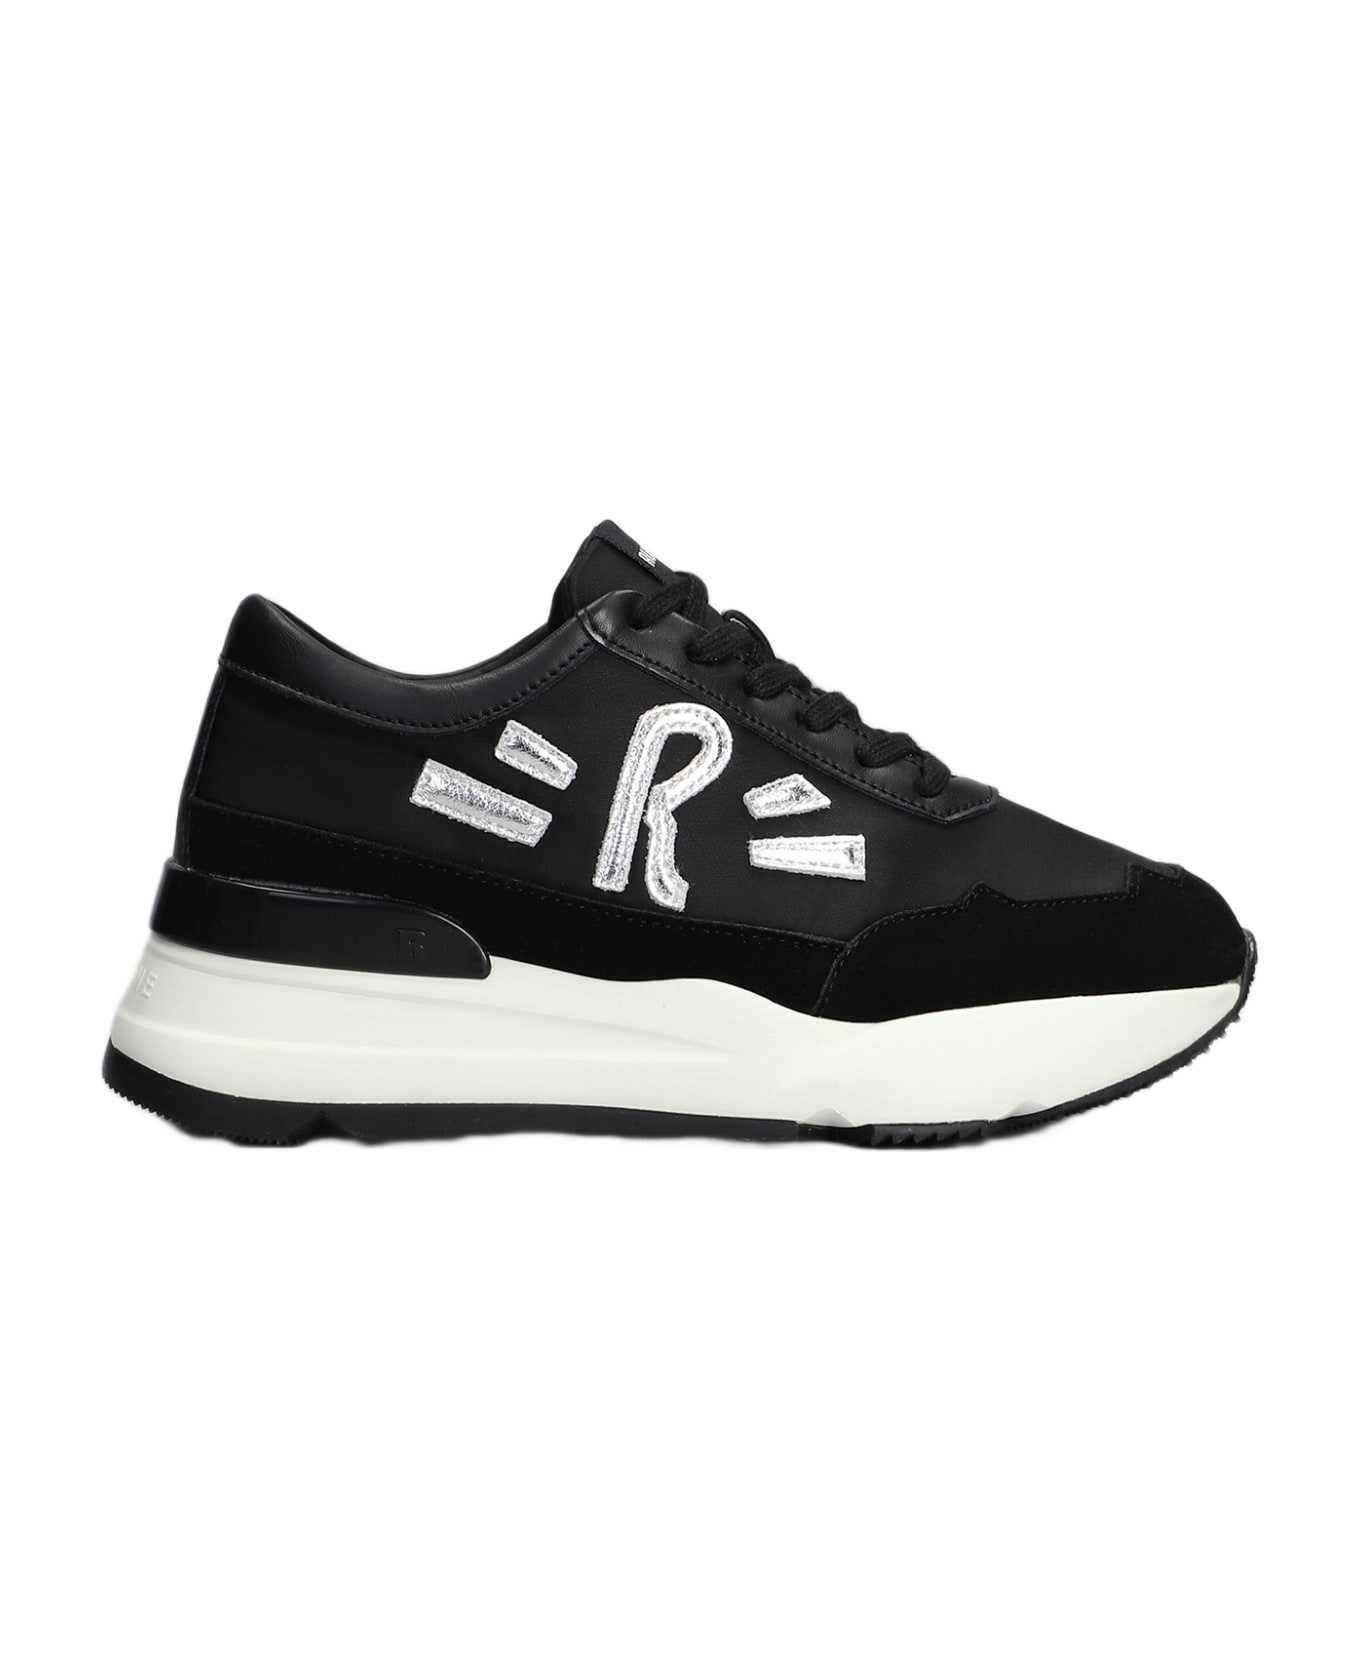 Ruco Line R-evolve Sneakers In Black Suede And Leather - black